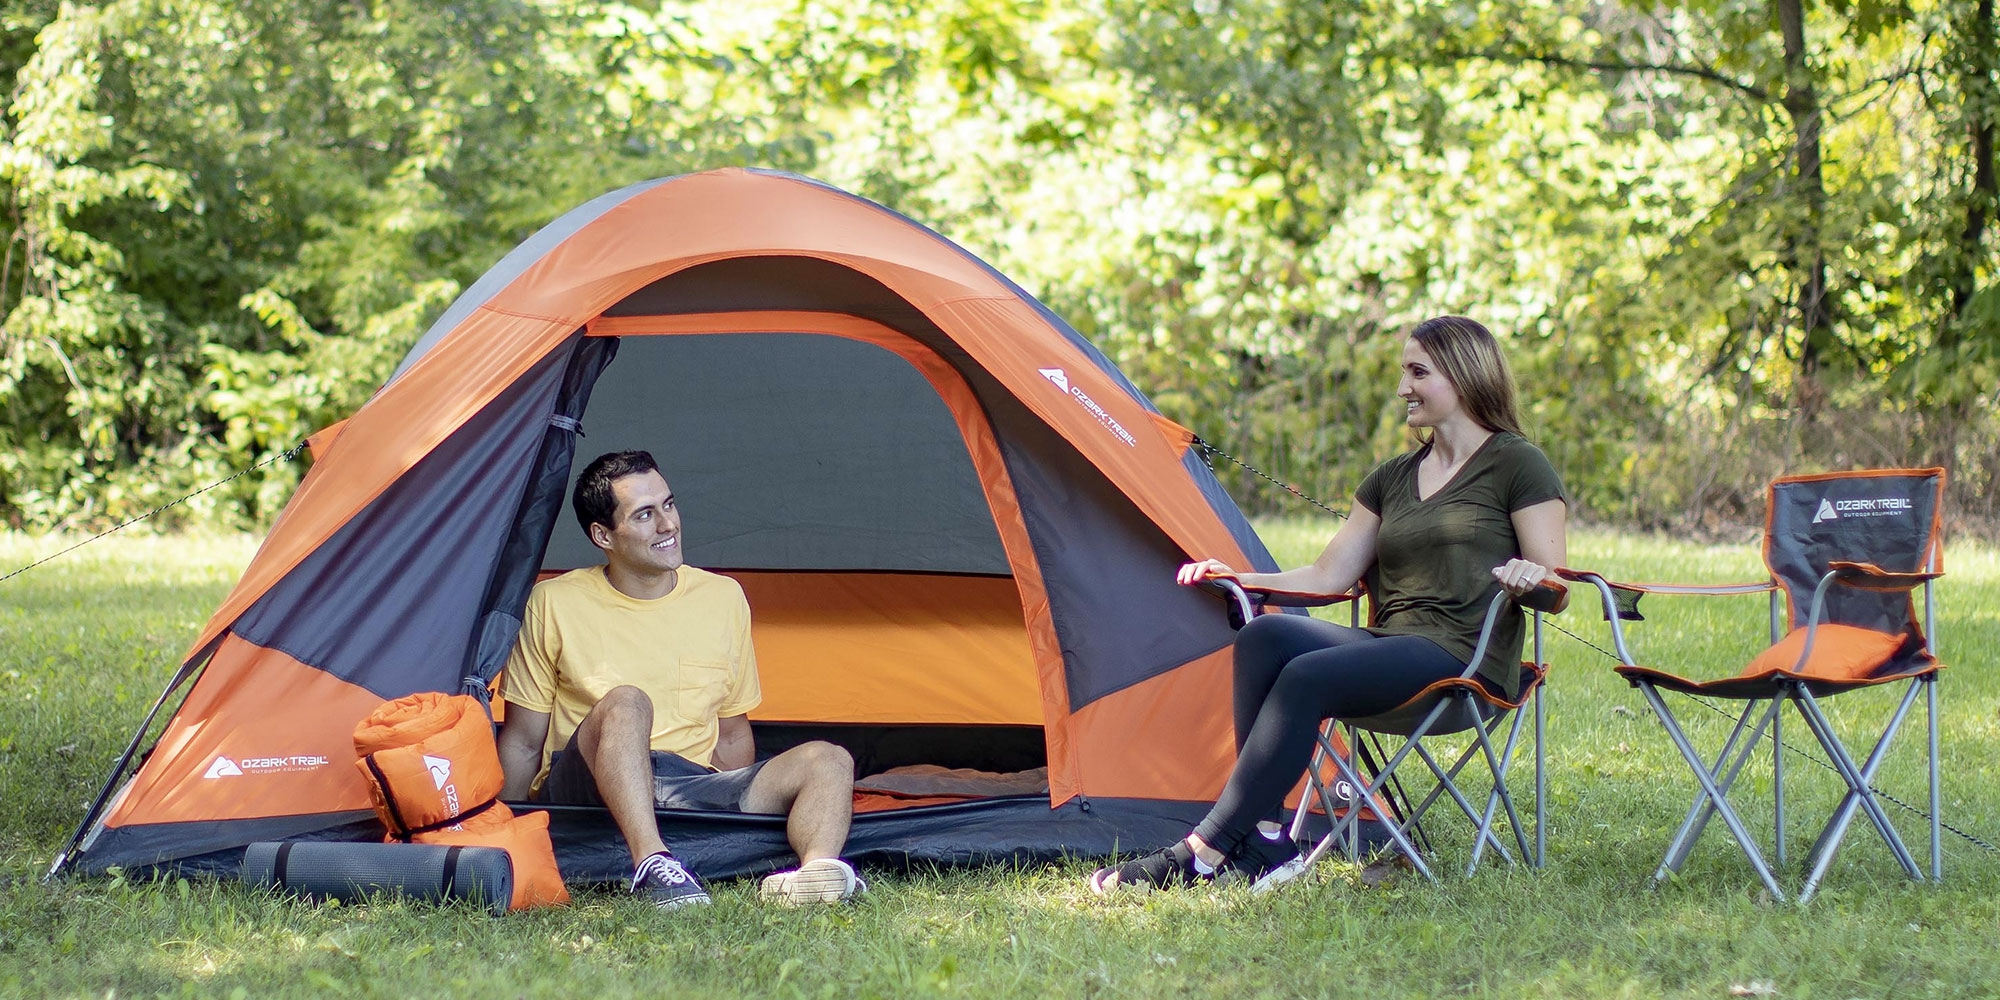 The Ozark Trail 22piece camping set has a tent, sleeping bags, more